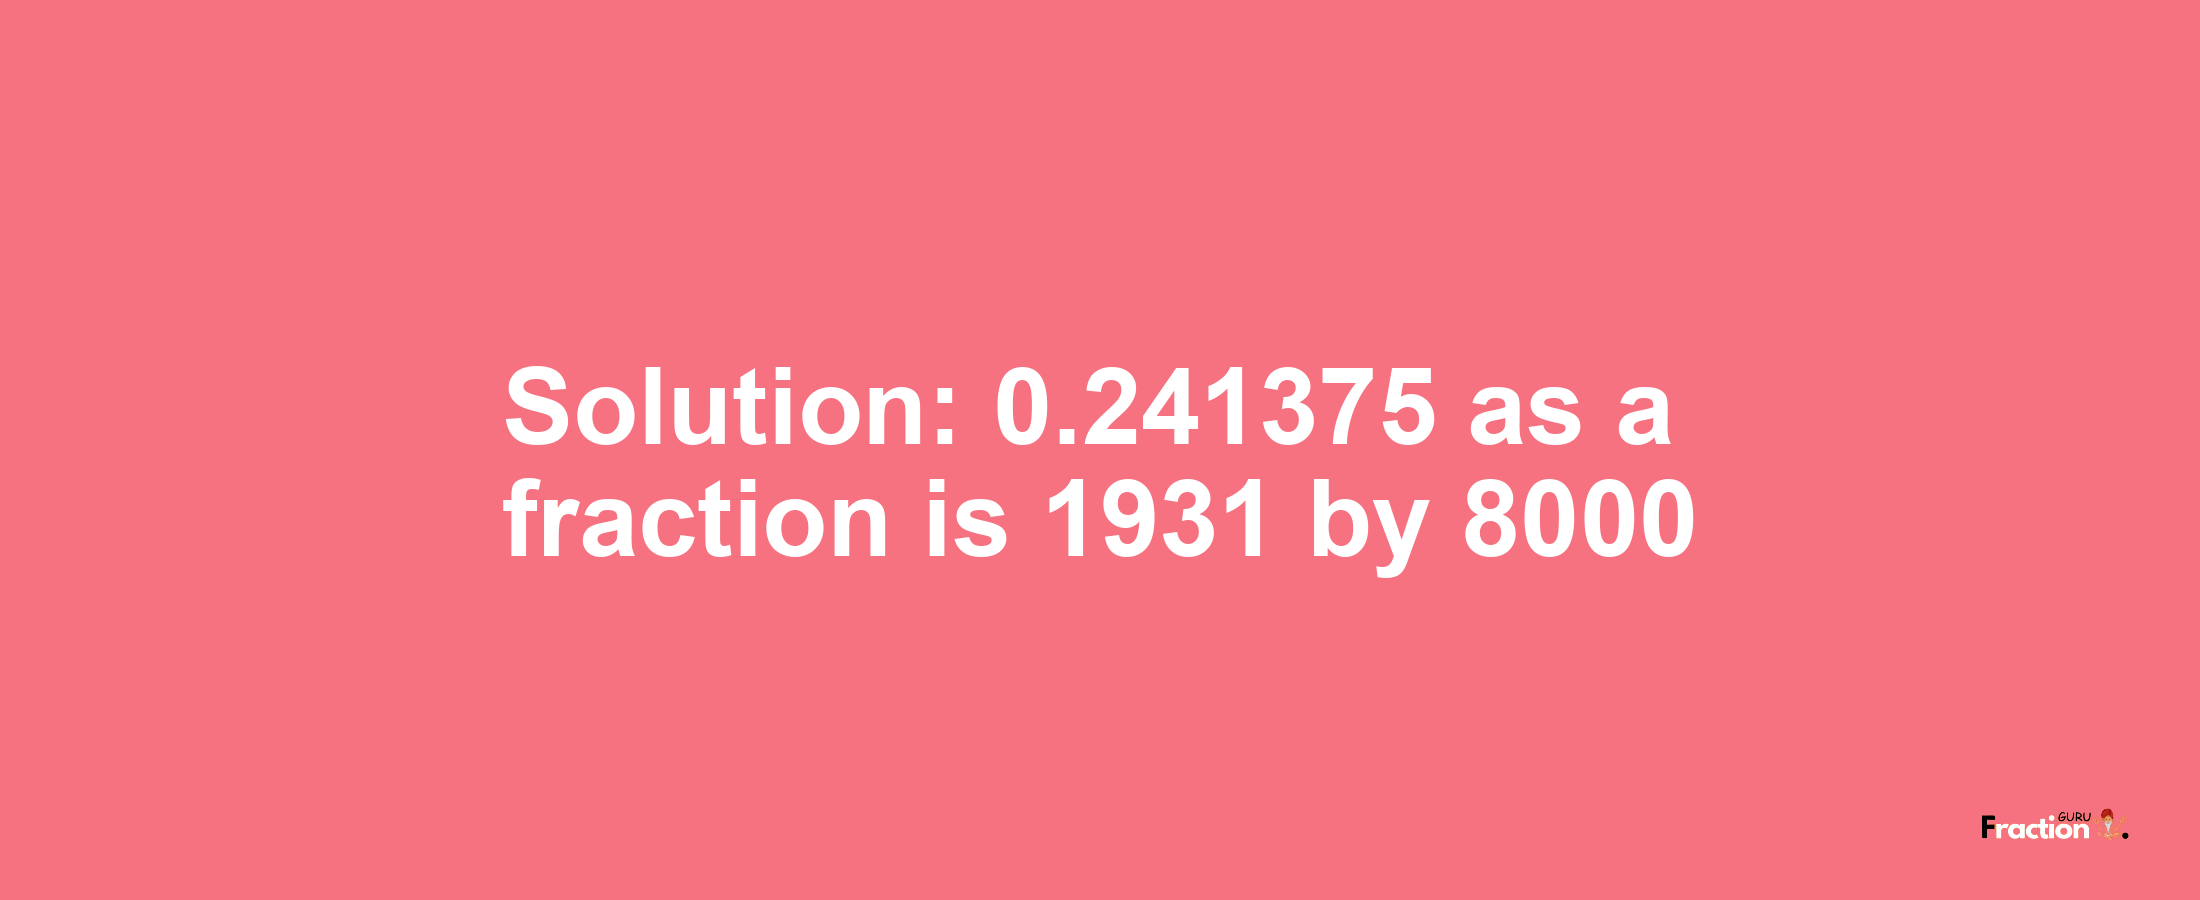 Solution:0.241375 as a fraction is 1931/8000